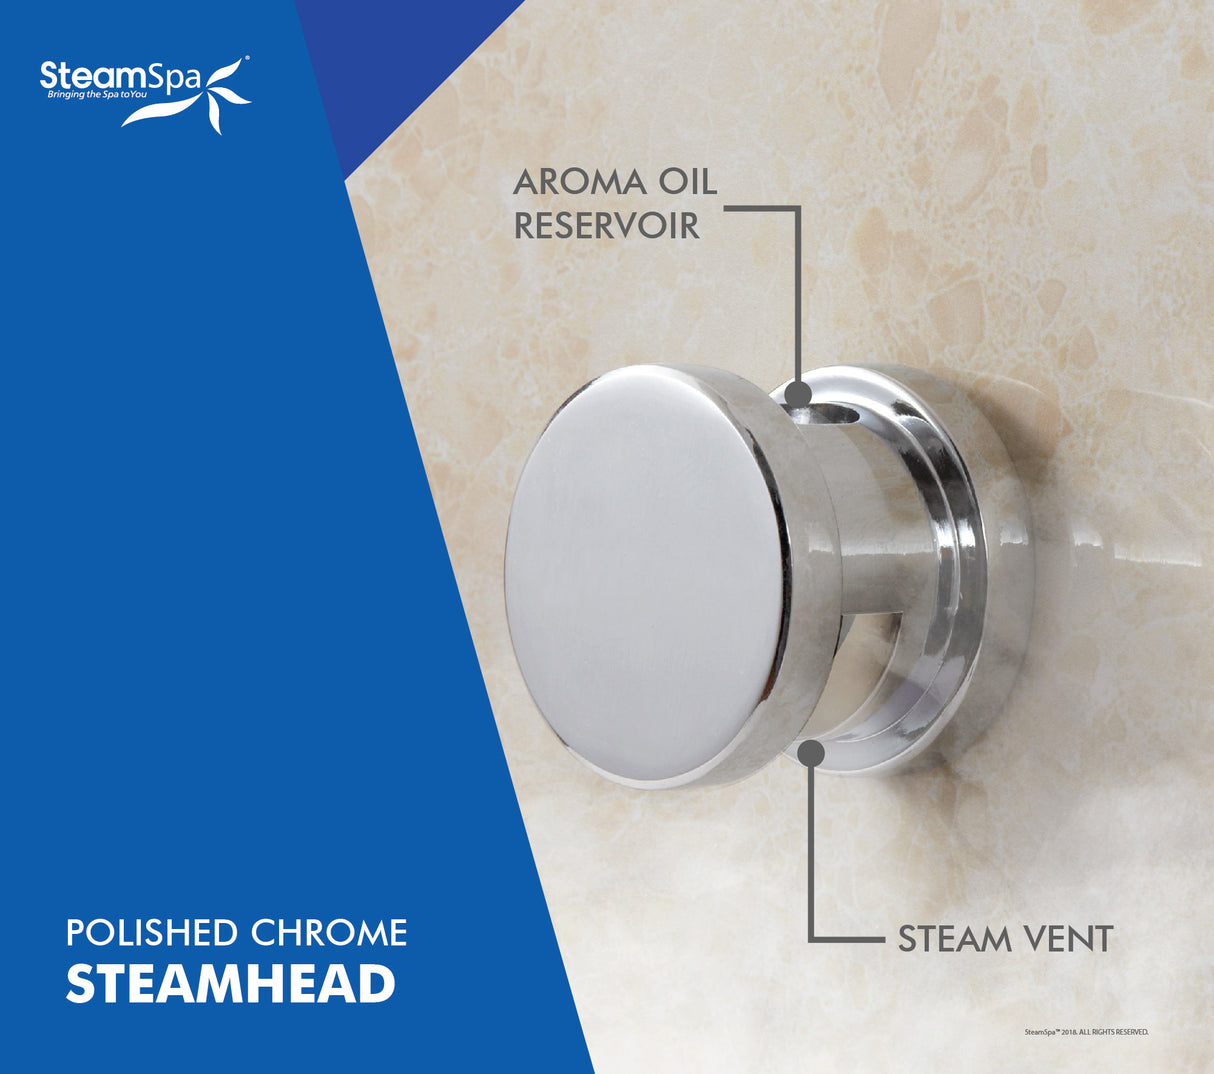 Raven Series 10.5kW QuickStart Steam Bath Generator Package in Polished Chrome RVT1050CH-A